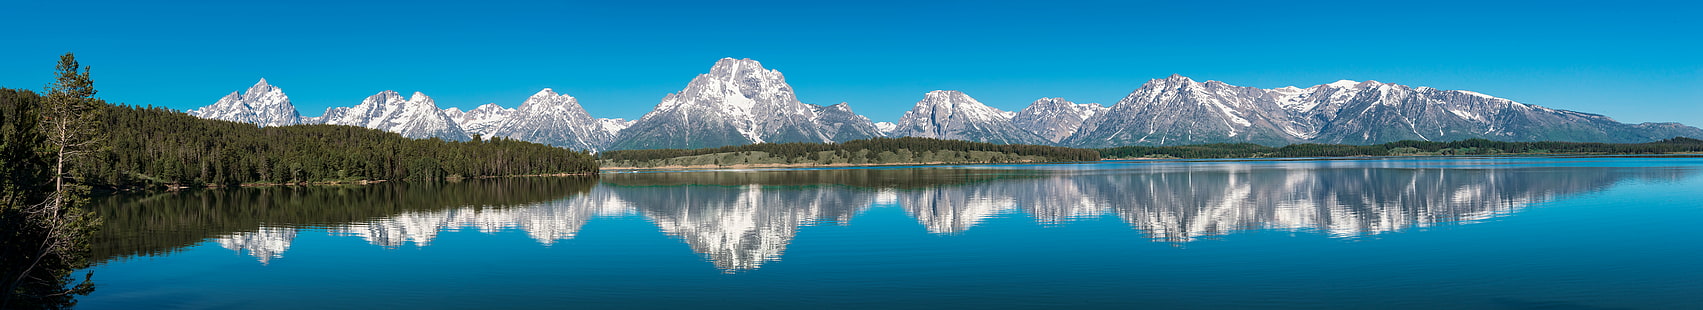 landscape photography of snowy mountain, jackson lake, jackson lake, Jackson Lake, Panoramic, landscape photography, snowy mountain, geo, lat, Moran, lon, geotagged, Adventure, Explore, Exploring, Teton Mountain Range, Grand Teton National Park, Grand Tetons, https, Reflection, Landscape, Mountain Range, Mountain View, National Park Service, Natural Wonder, Nature, NPS, Outdoor, Pano, Scenic, Spot, View, Cap, Still Water, Teton County, Park Road, Tetons, Tourism, Tourist Attraction, Travel Blog, Travel Photography, Traveling, Adventures, U.S. National Park Service, United States, National Park, Park  Vista, Water, Waterscape, World Travel, WY, Wyoming, lake, mountain, scenics, outdoors, sky, blue, beauty In Nature, mountain Peak, tranquil Scene, summer, HD wallpaper HD wallpaper